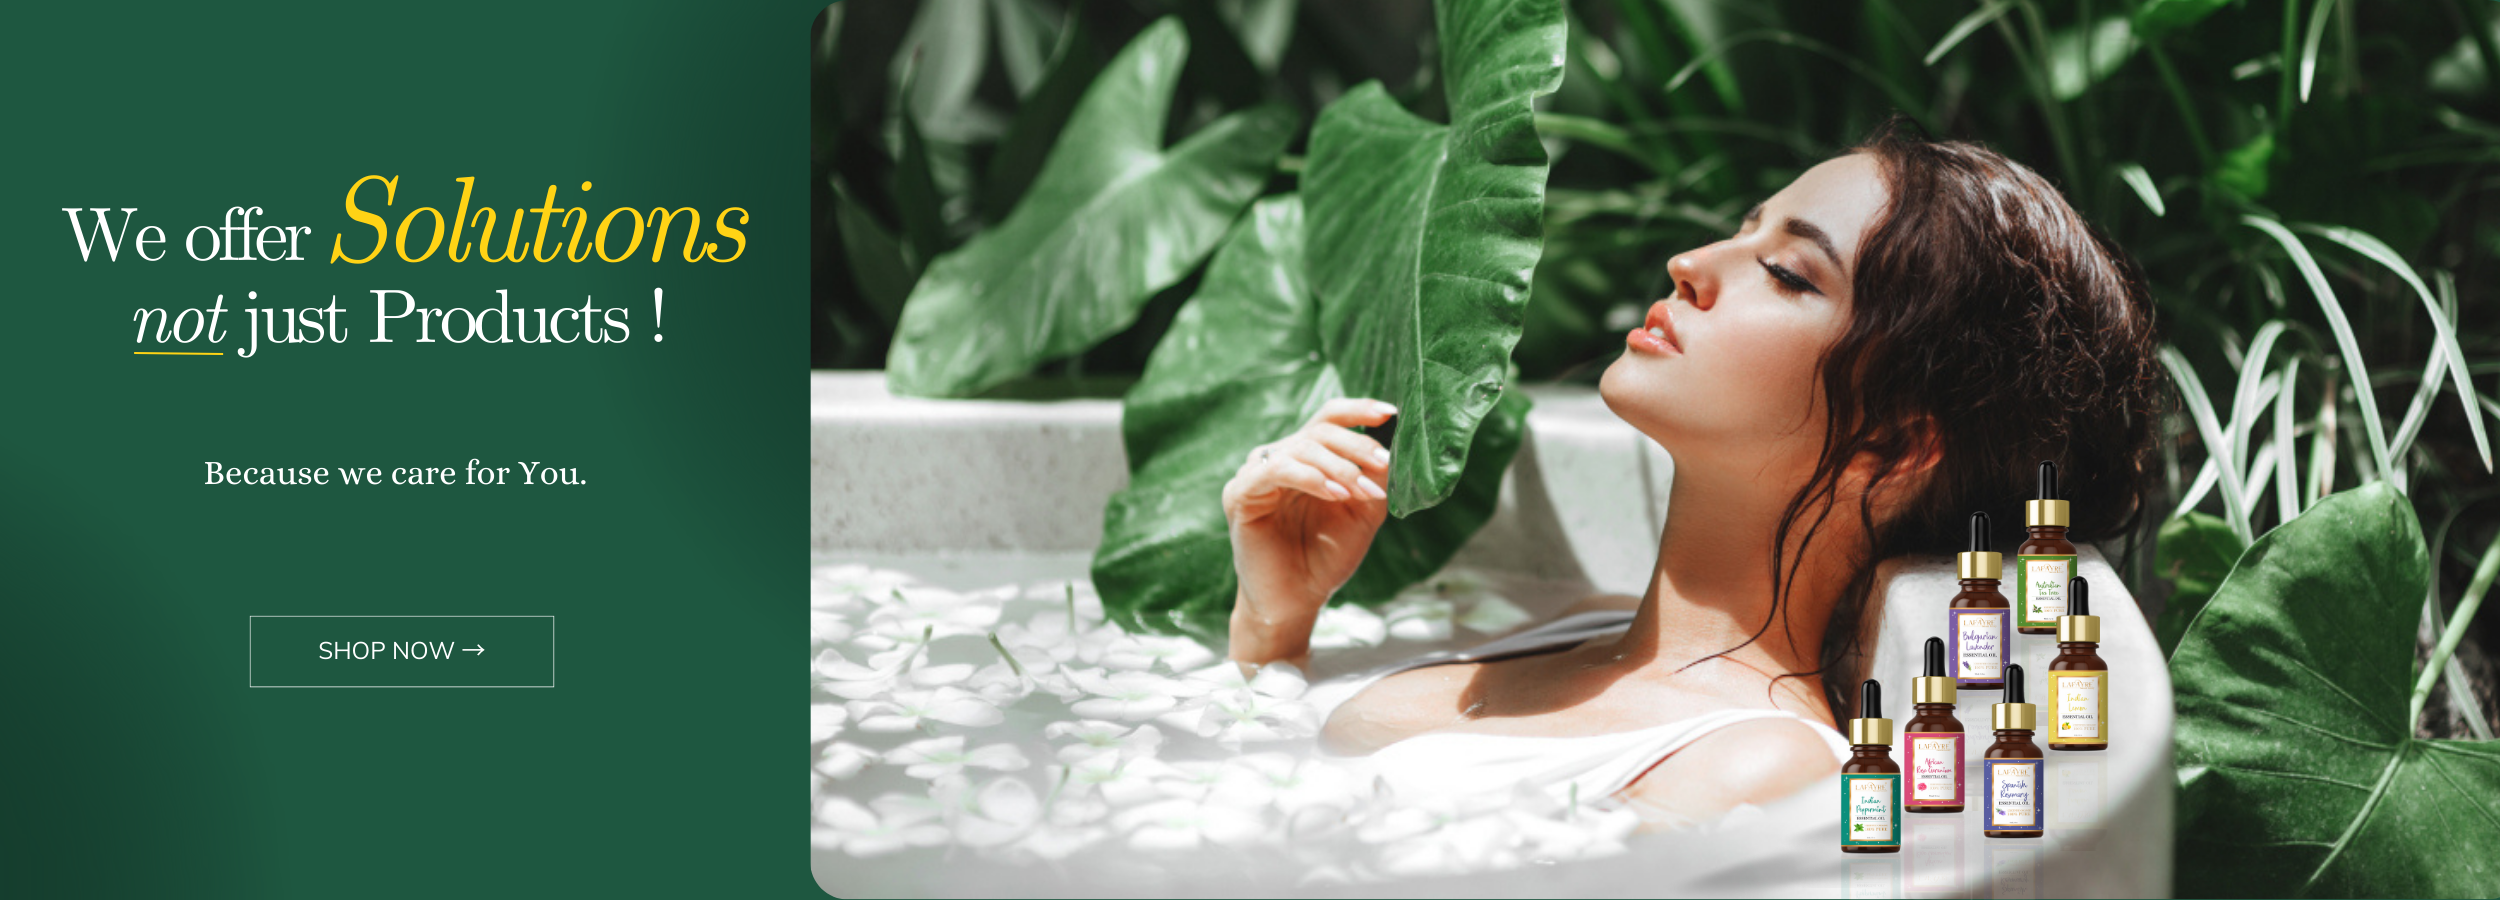 a woman in a bathtub with flowers and lafayre 100% pure essential oils with heading we offer solutions not just products because we care for you